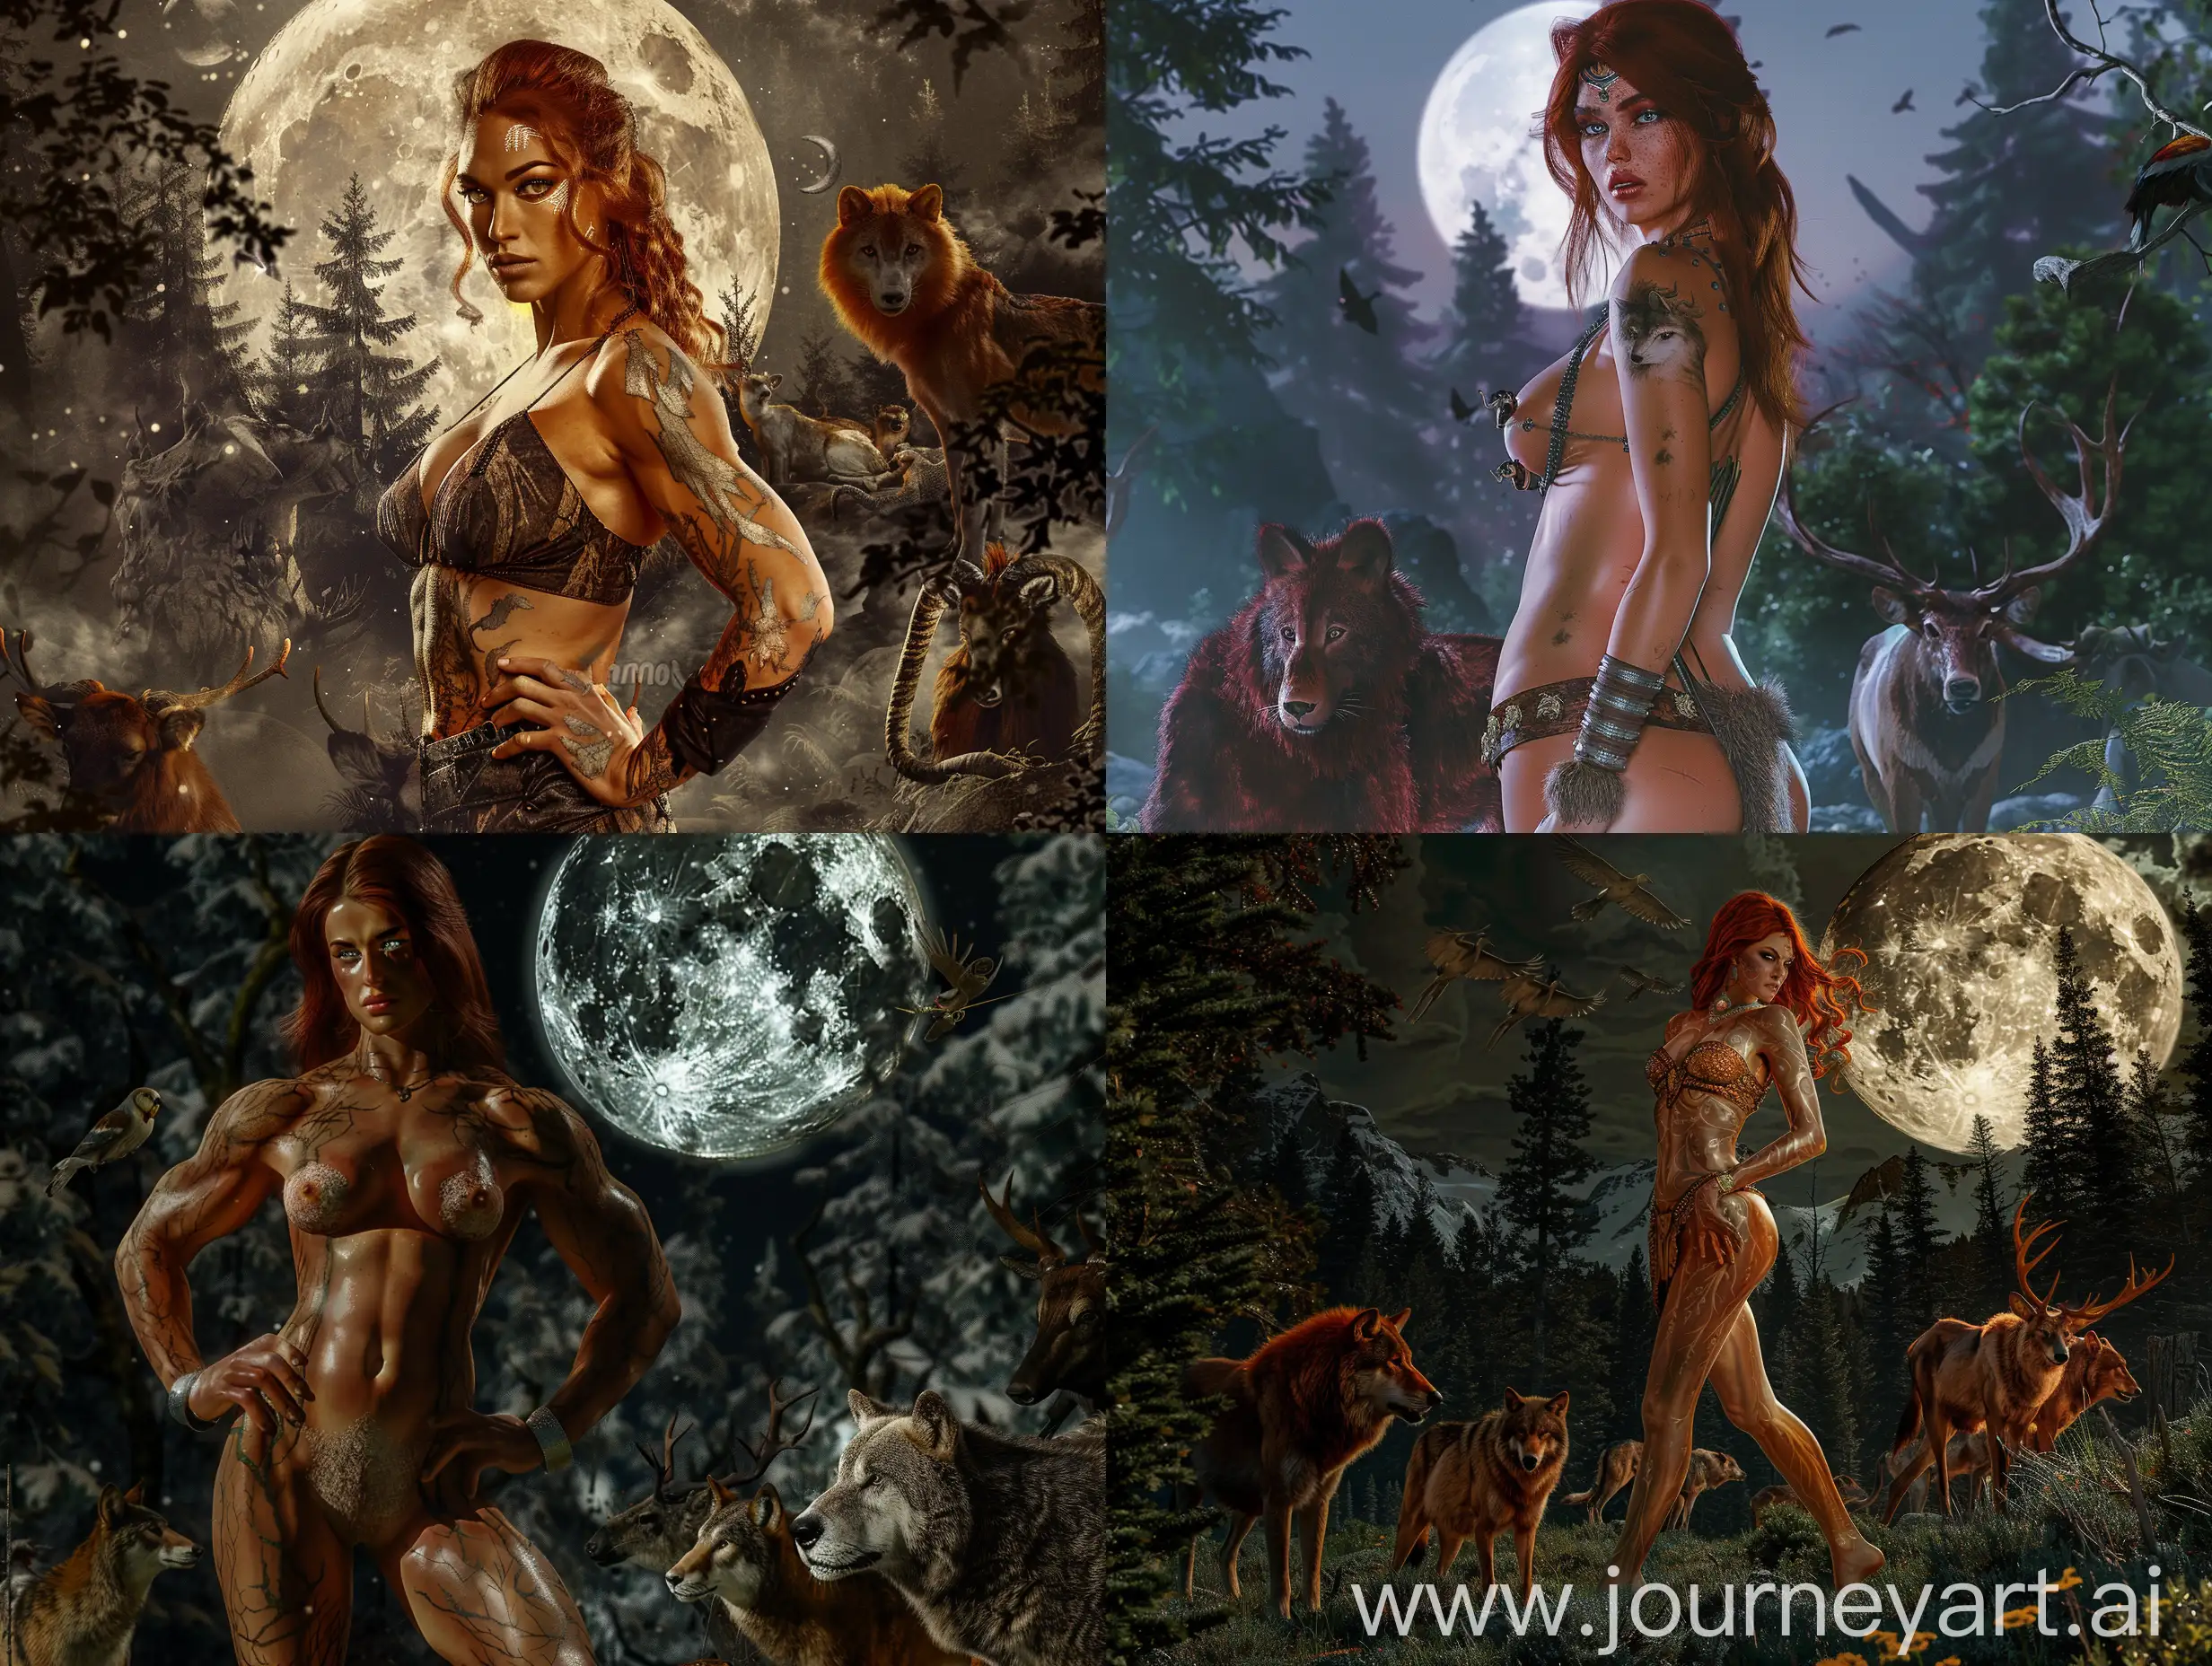 Subject: a goddess above all the wild and forests and is feared by other gods. Alabaster skin, striking beauty, muscular and lean, auburn hair, silver eyes. 

Background: the forests, the moon, the wild animals accompanying her. 

Styling and color: 4k hyper detailed realistic Impressionism, fantasy canvas.  {highly detailed, intricate, stunning, extremely realistic painted realism, detailed digital painting concept art. 

Finishing touches: canvas of imagination. (attention to design, attention to mood, attention to composition). (sublime artistic skill), (high artistic ability), (expert craftsmanship),